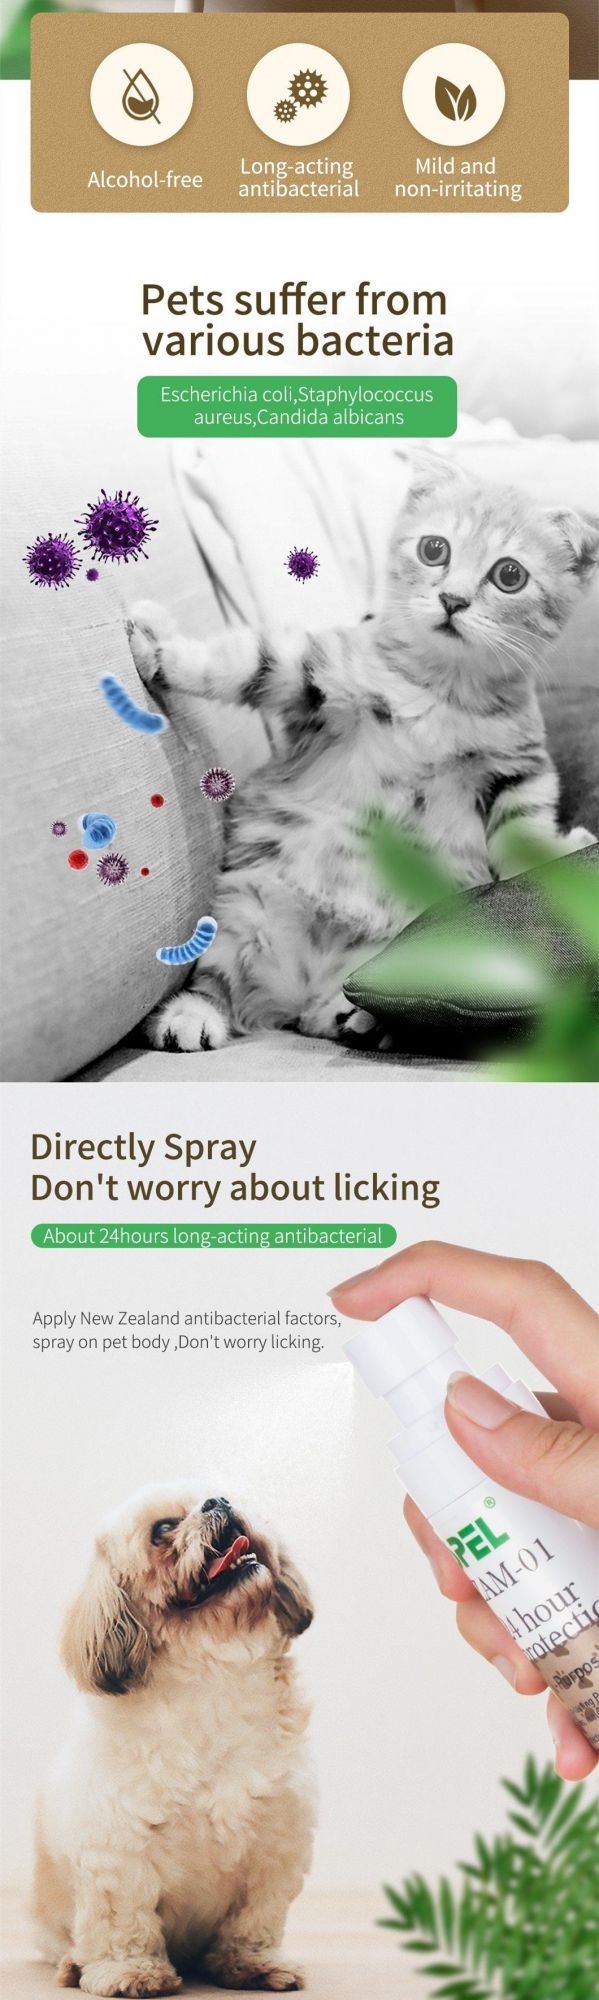 Pet Grooming Cleaning Wash Free Product Dogs Pets and Toys Disinfection Spray Killing Rate 99.9% Antibacterial Body Sanitizer for Pet Living Space Disinfection